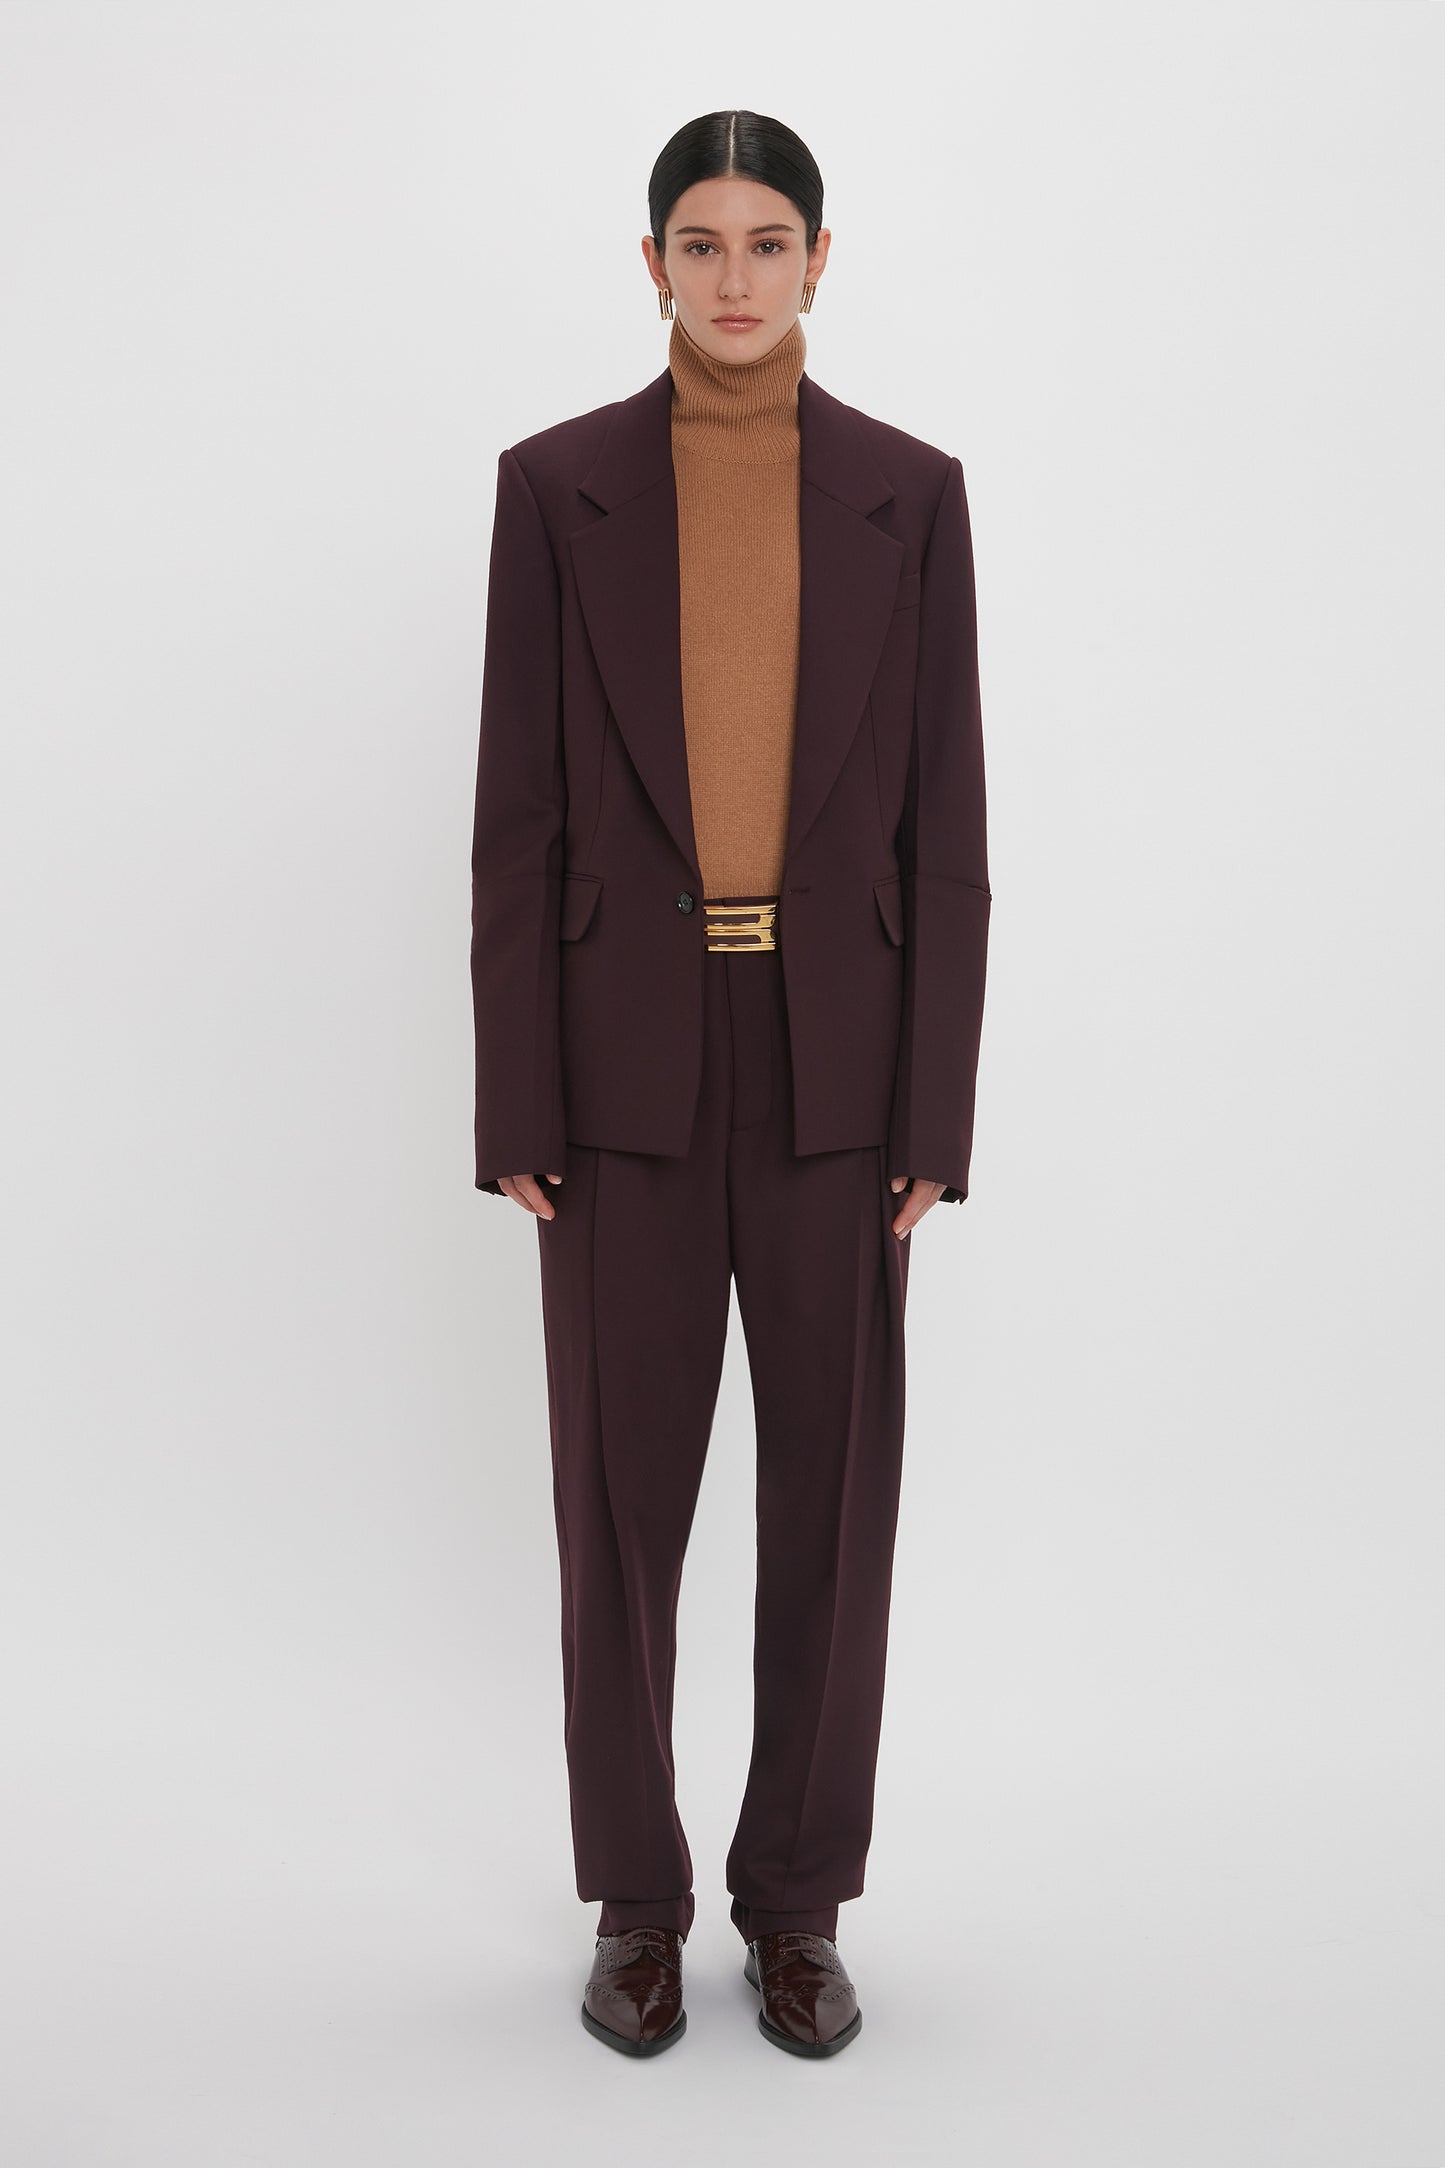 A person stands against a plain white background wearing the Sleeve Detail Patch Pocket Jacket In Deep Mahogany by Victoria Beckham, along with a deep mahogany turtleneck and matching brown dress shoes. They have straight dark hair tied back and wear minimal jewelry.